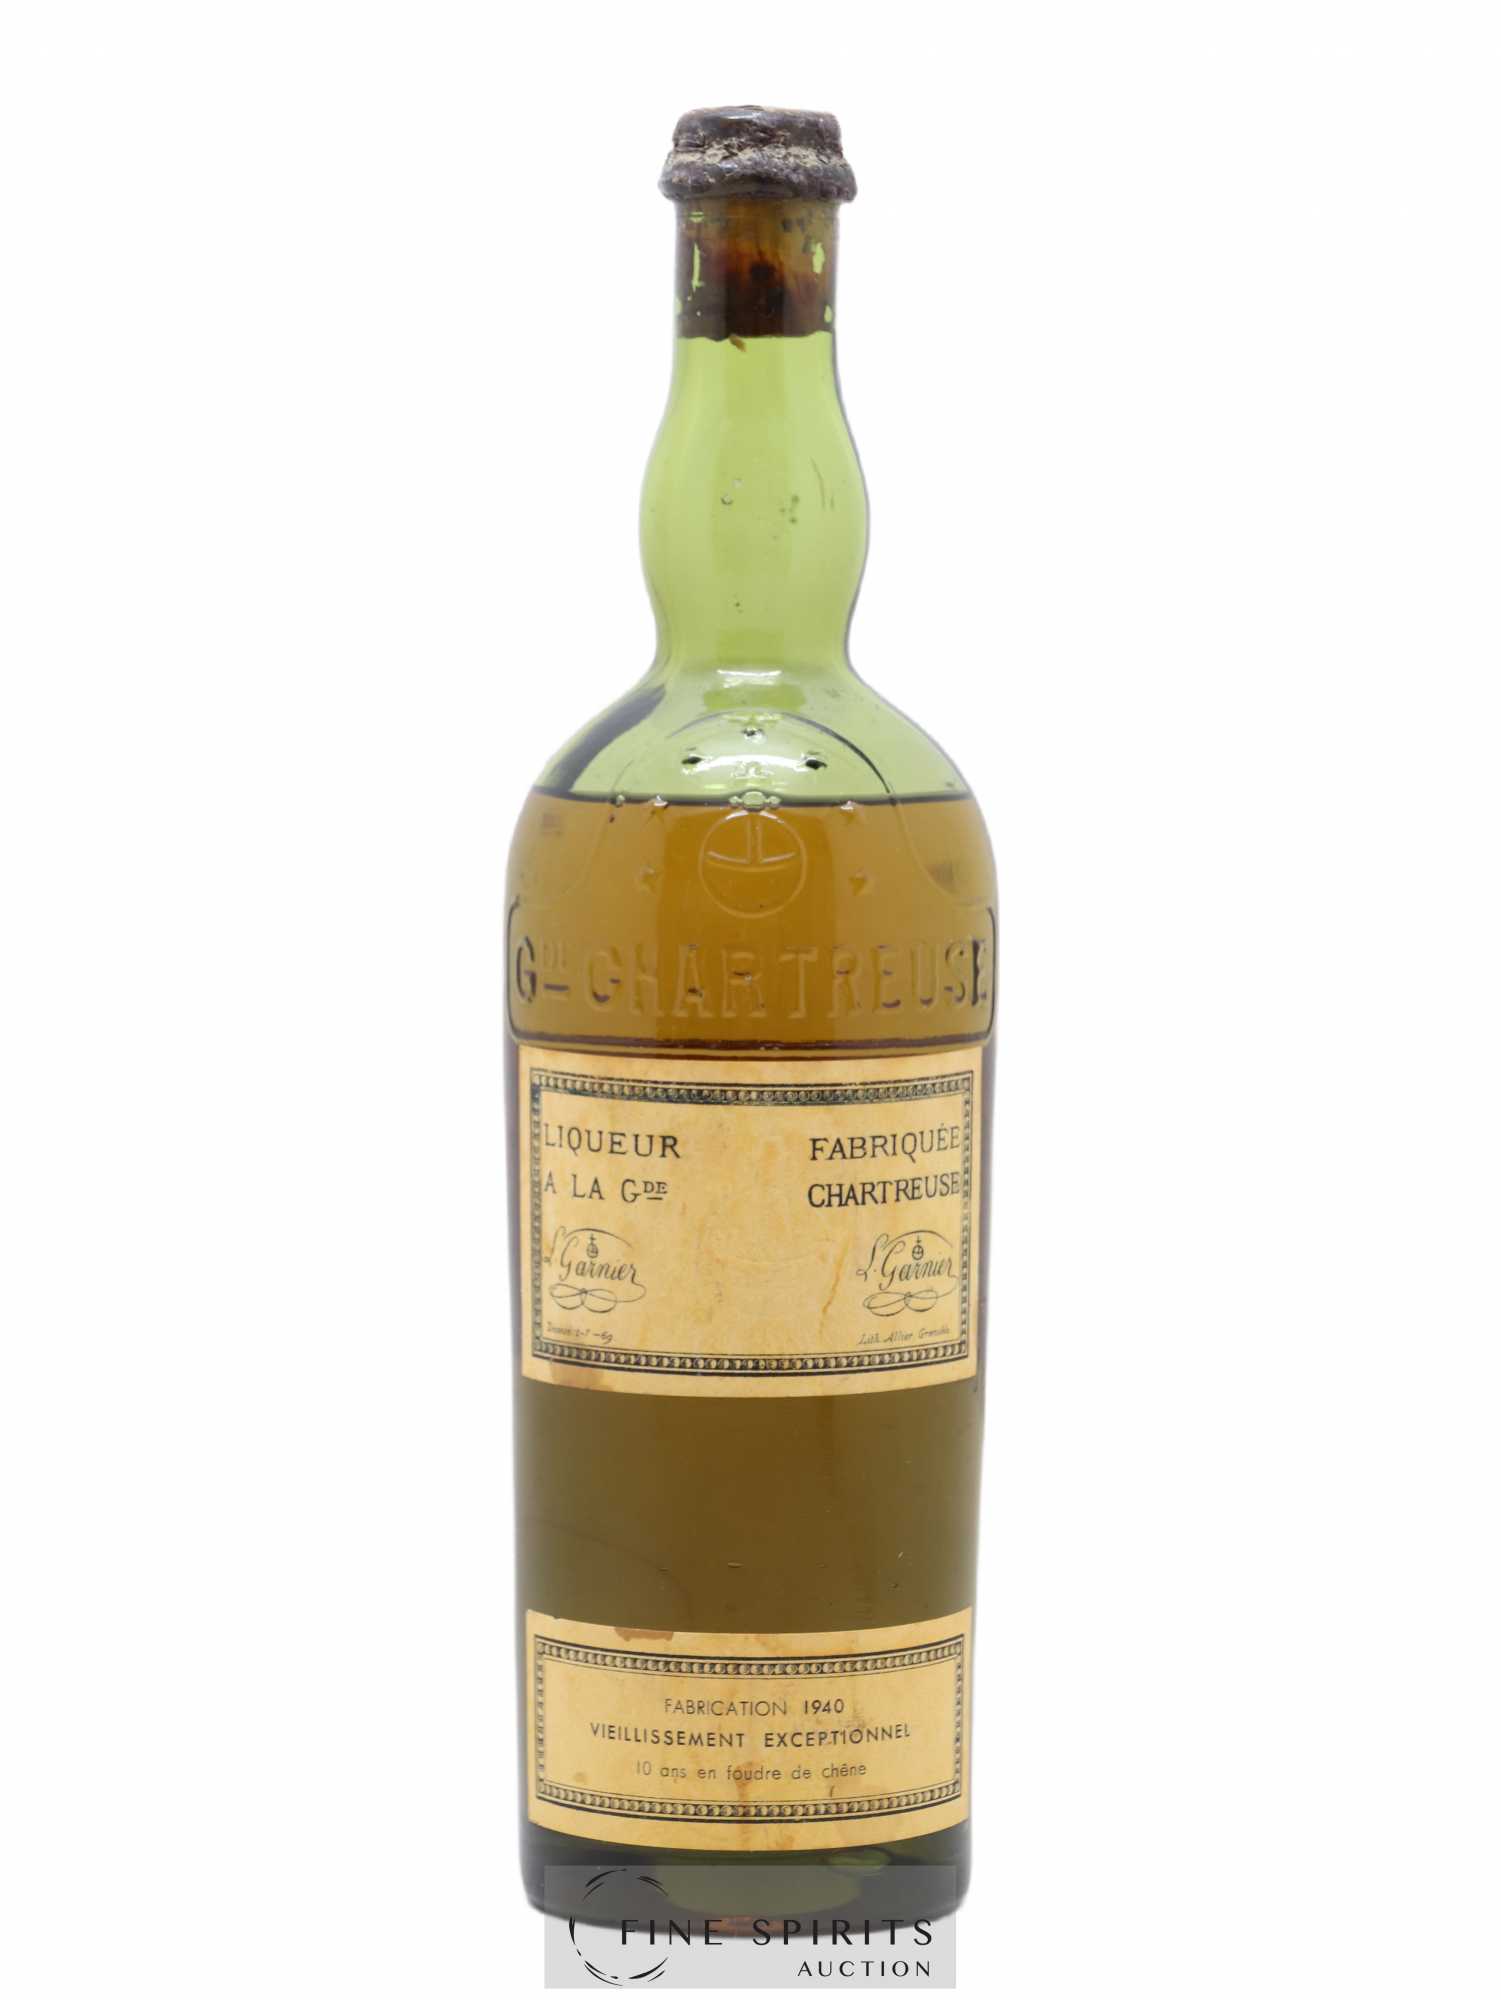 Chartreuse 10 years 1940 Of. Vieillissement Exceptionnel One of 800 